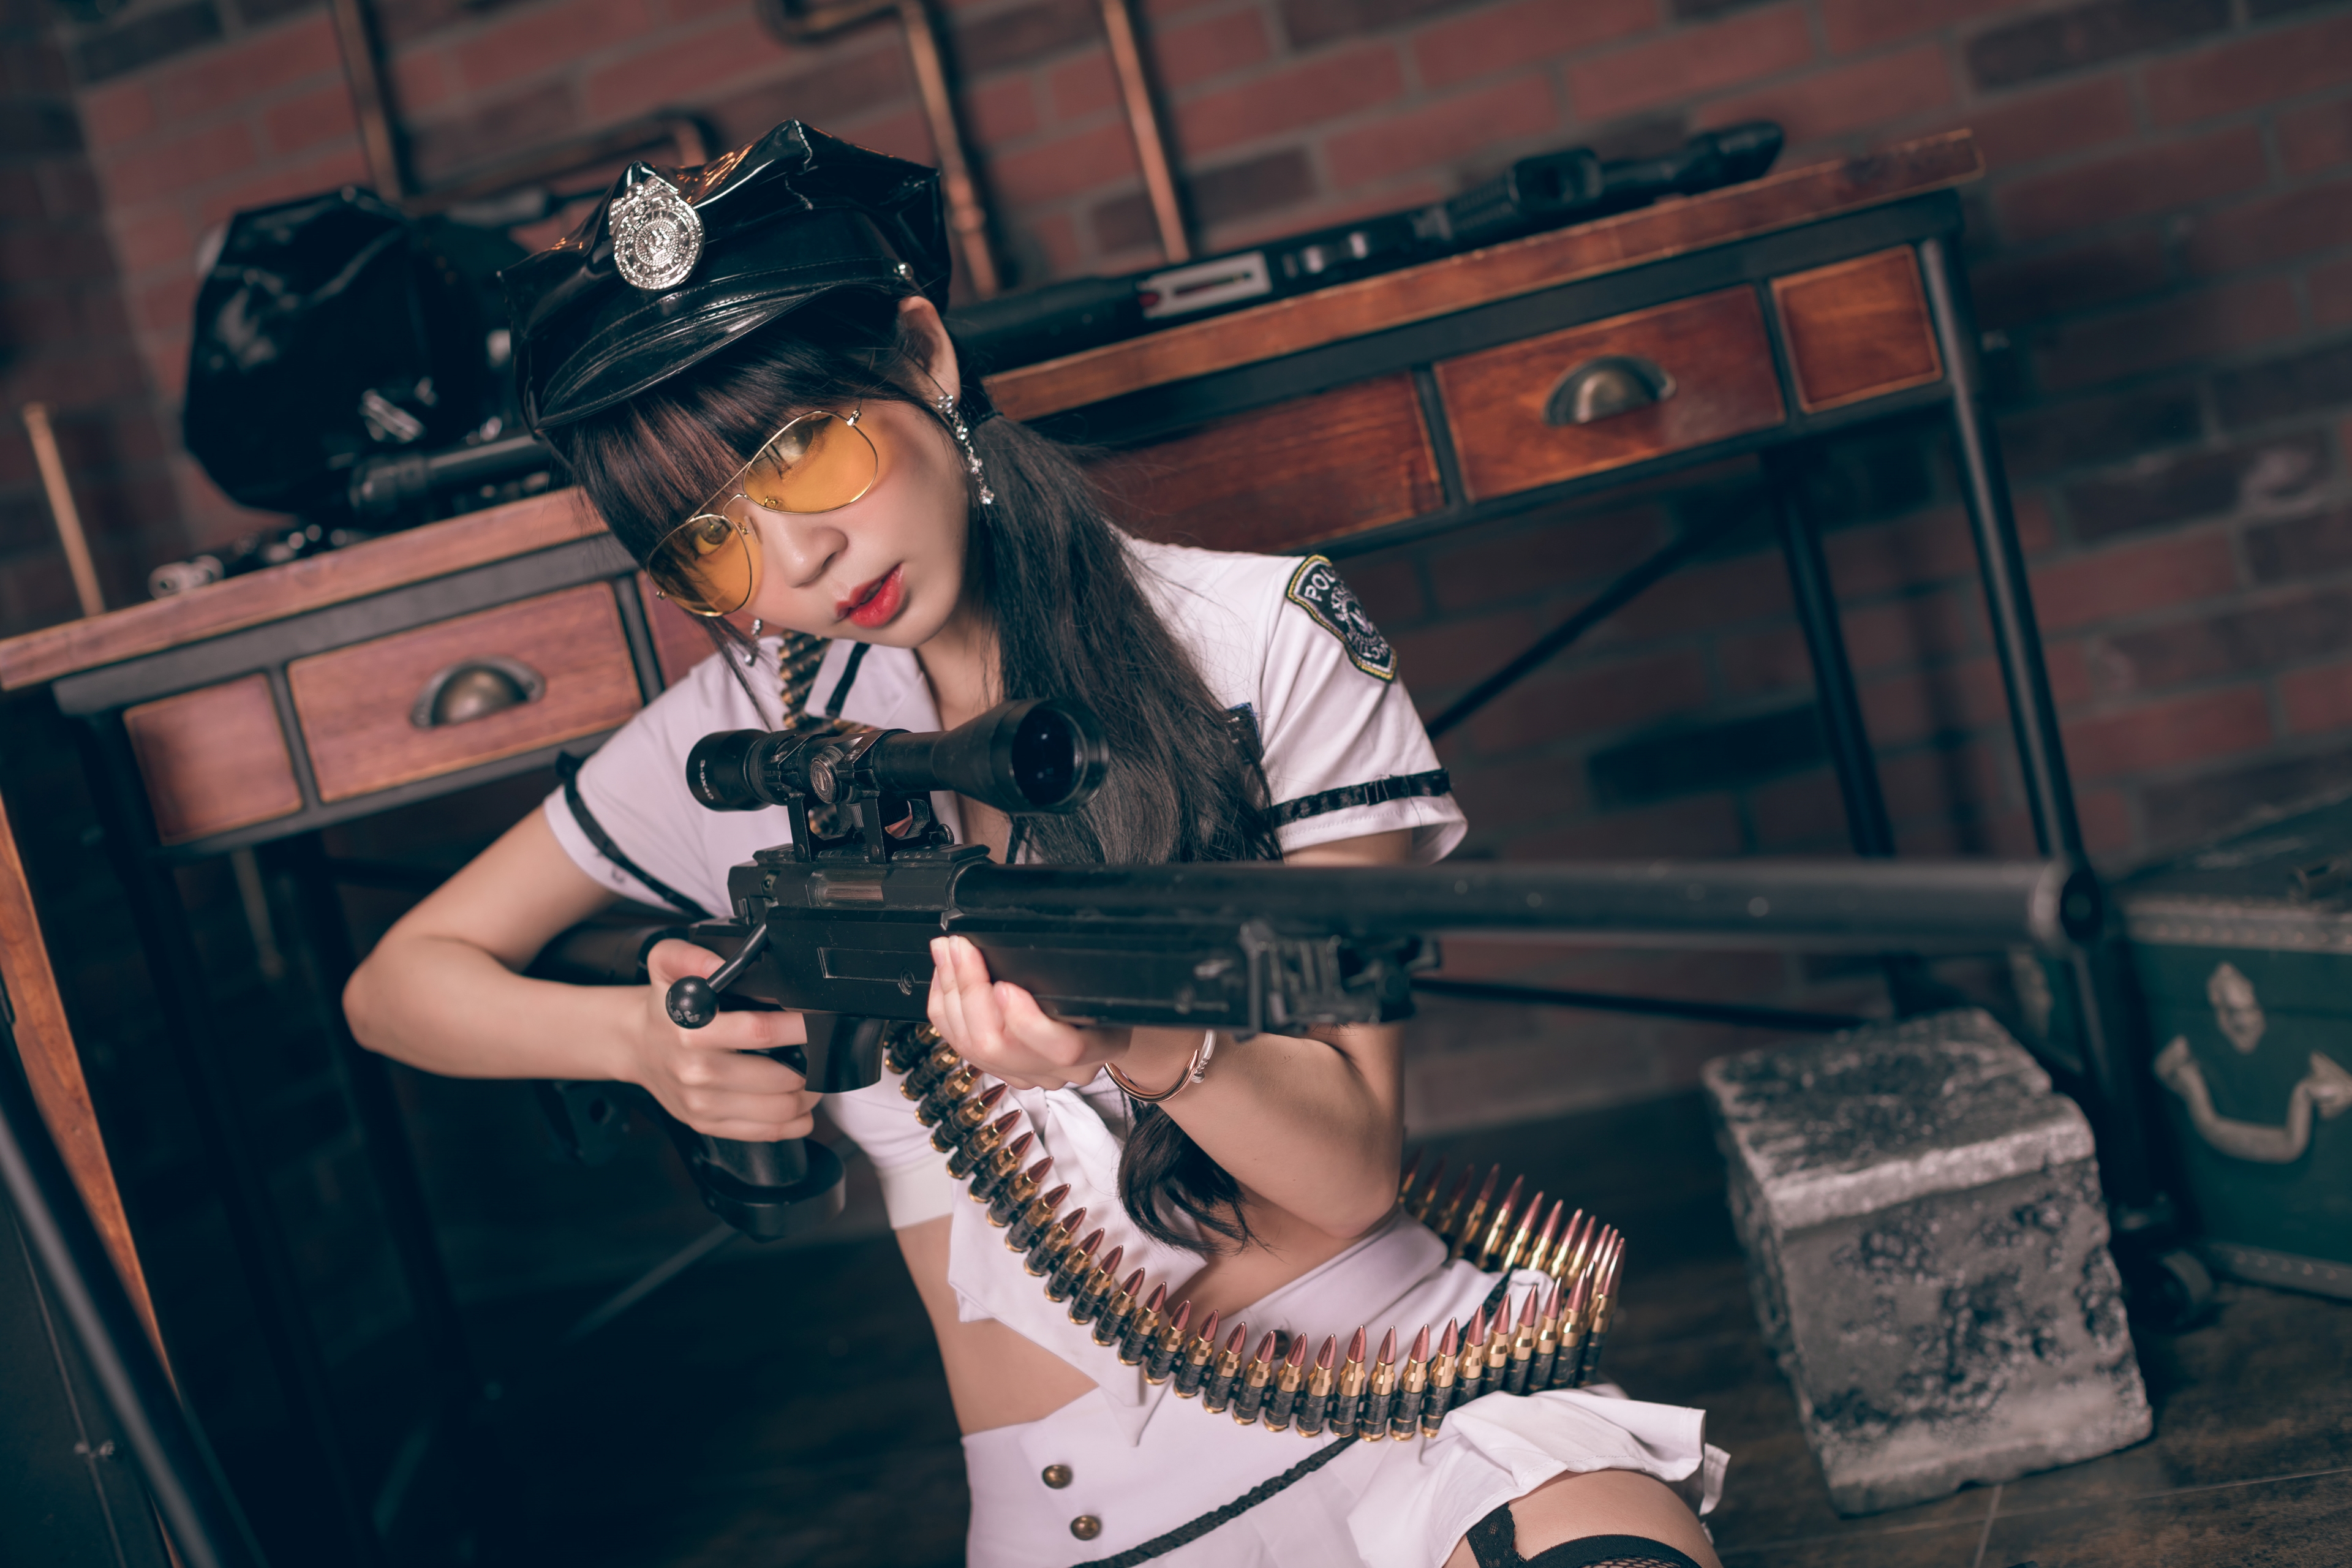 People 3840x2560 Serene Liu women model cosplay police women brunette bangs berets women with glasses police costume uniform looking away parted lips rifles ammunition bullet weapon lingerie garter straps stockings black stockings fishnet stockings indoors women indoors black hair long hair fishnet Chinese Chinese model girls with guns women with hats women with shades Asian